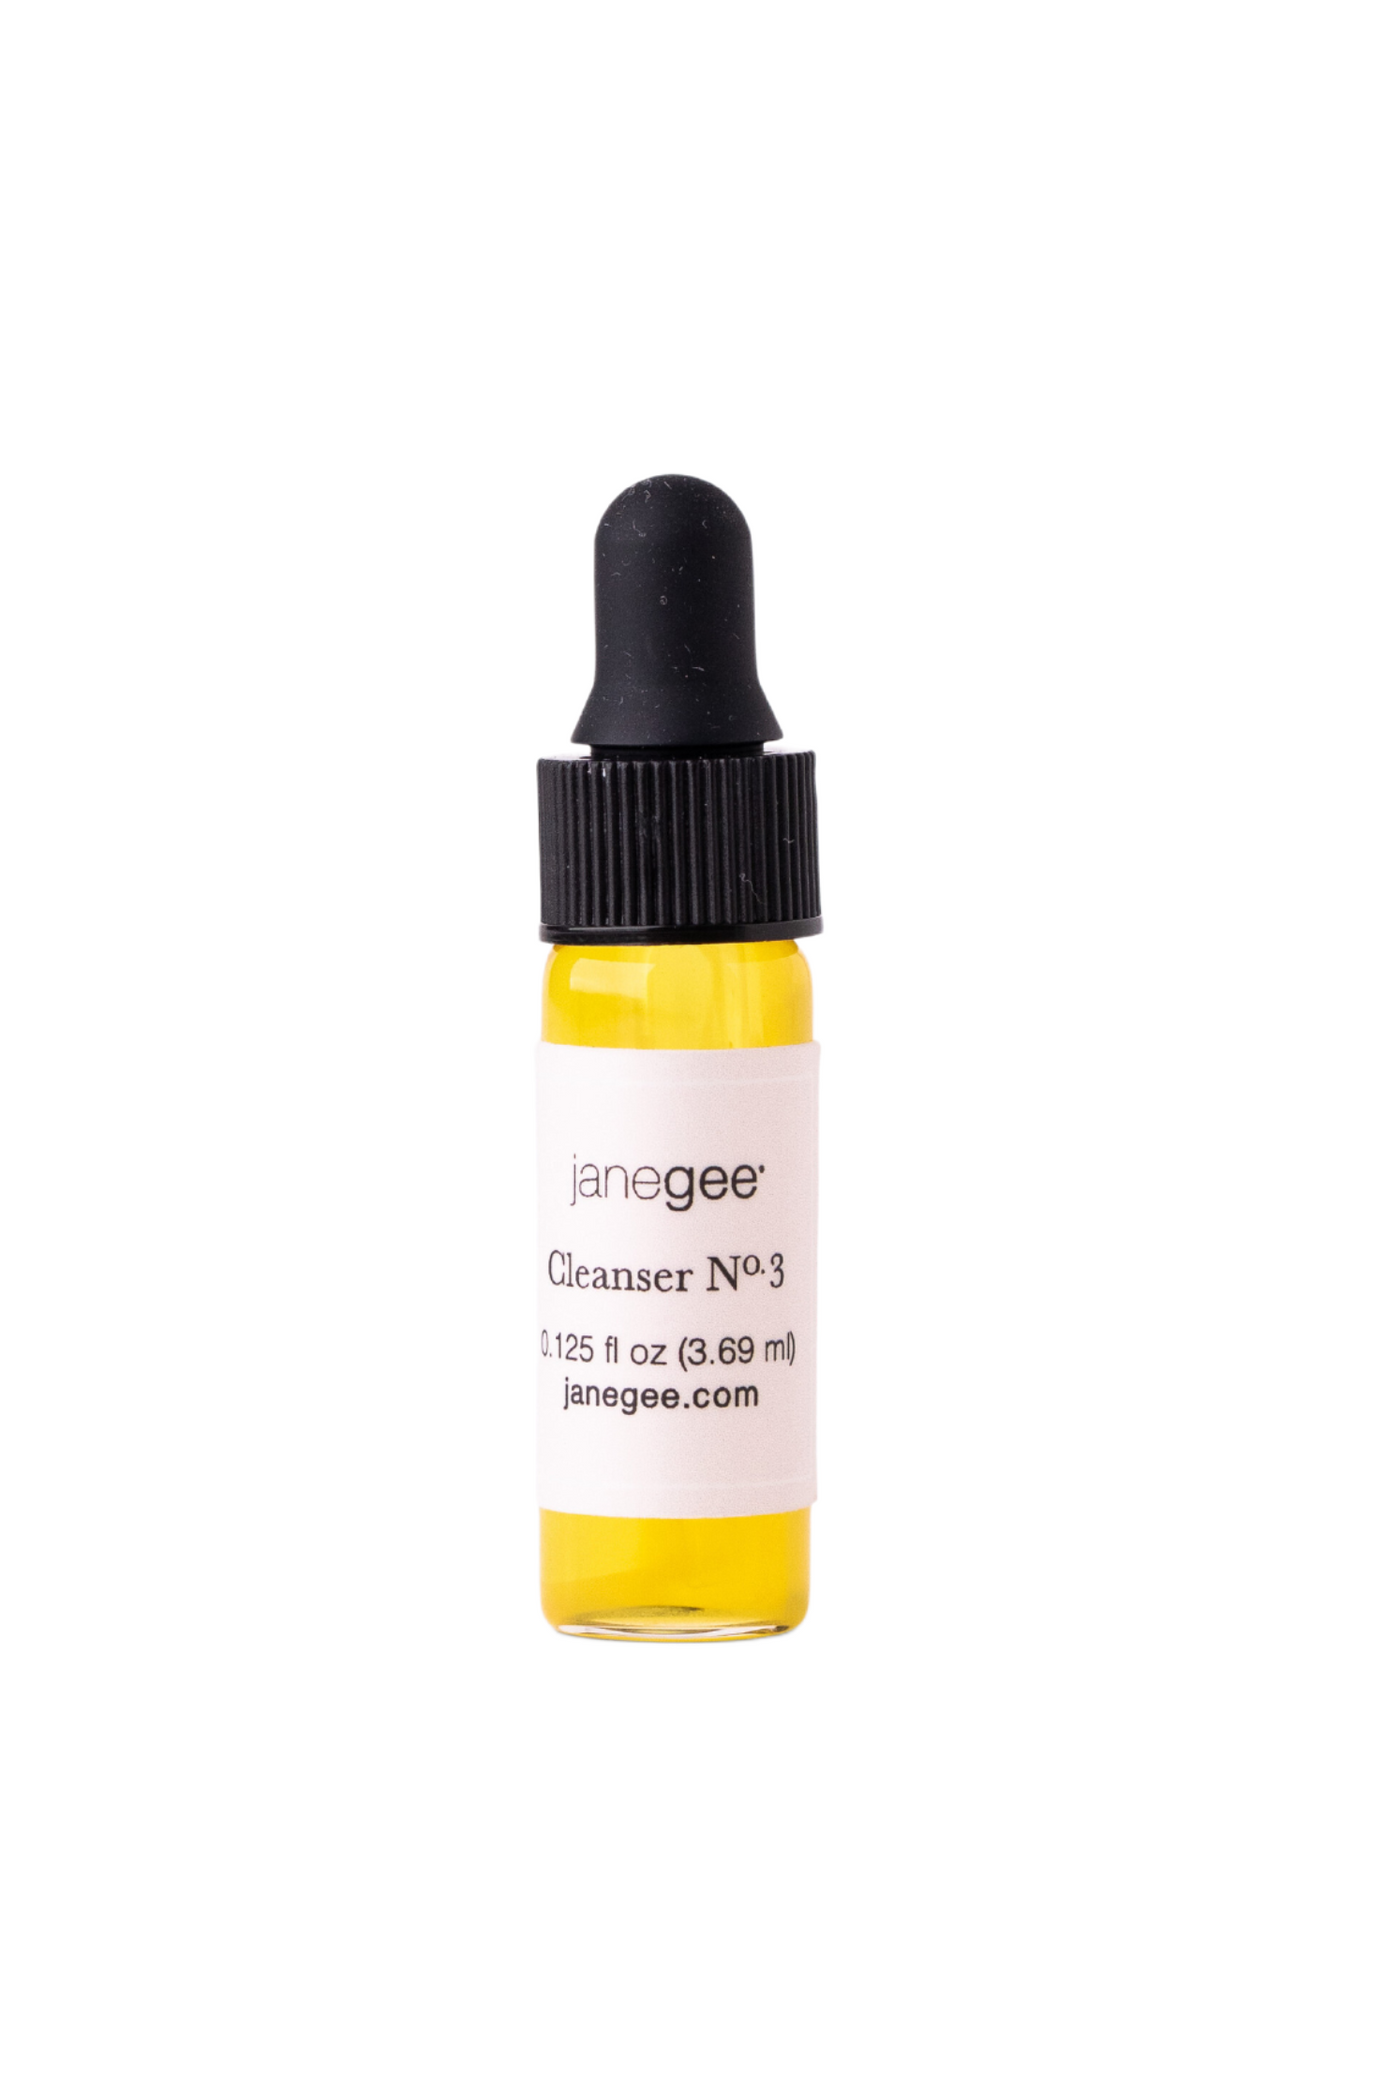 janegee Cleanser No.3 Sample